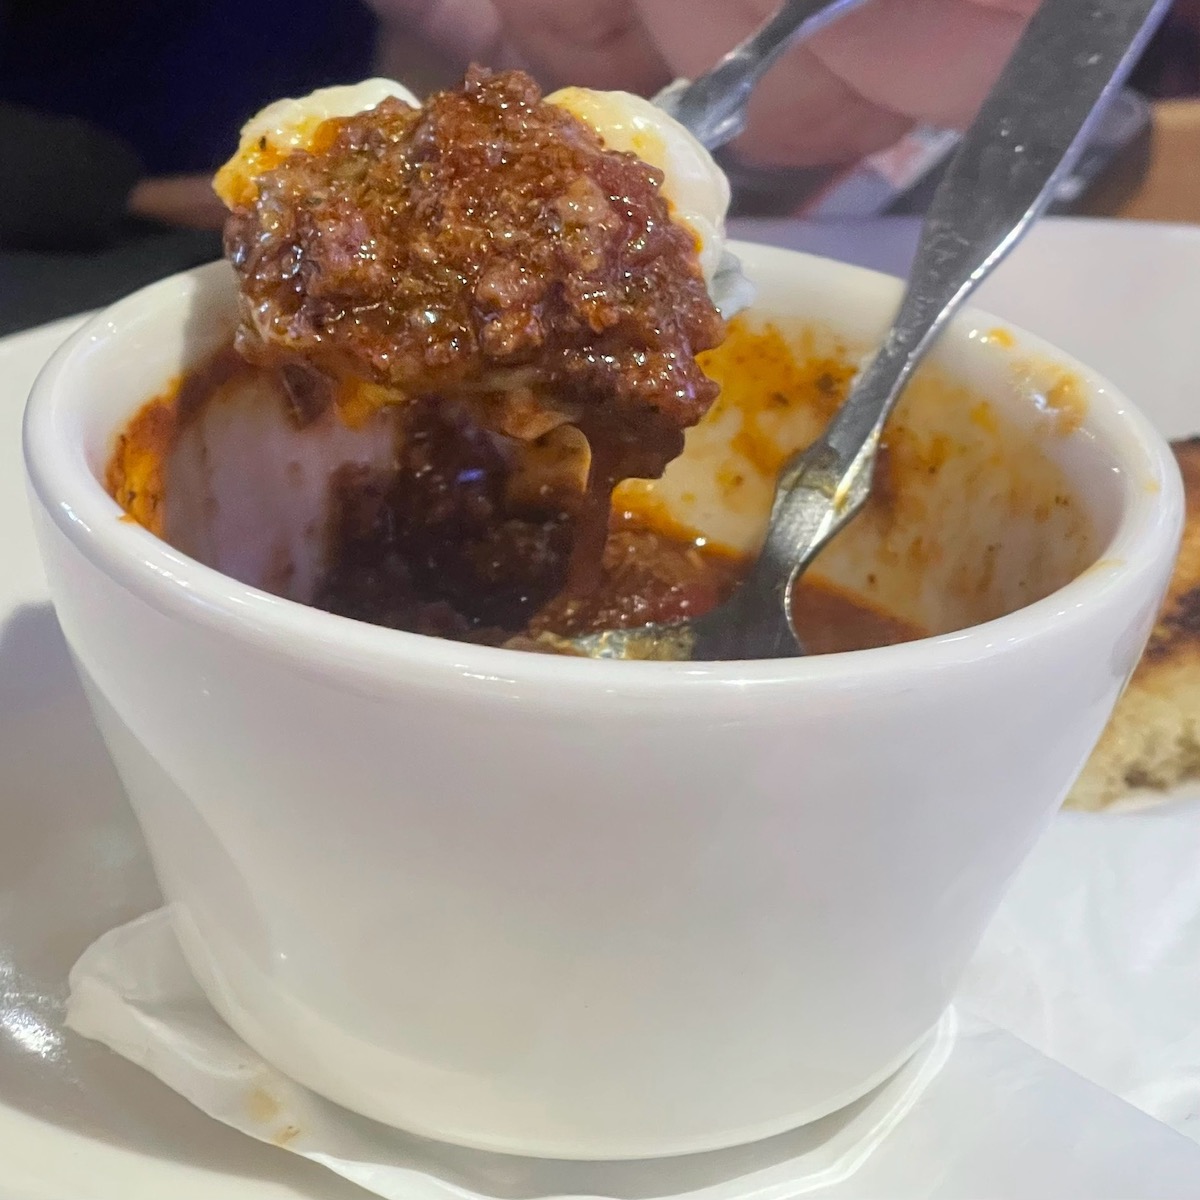 My Chili Mac Creation at Twin Peaks Restaurant in Doral, Florida